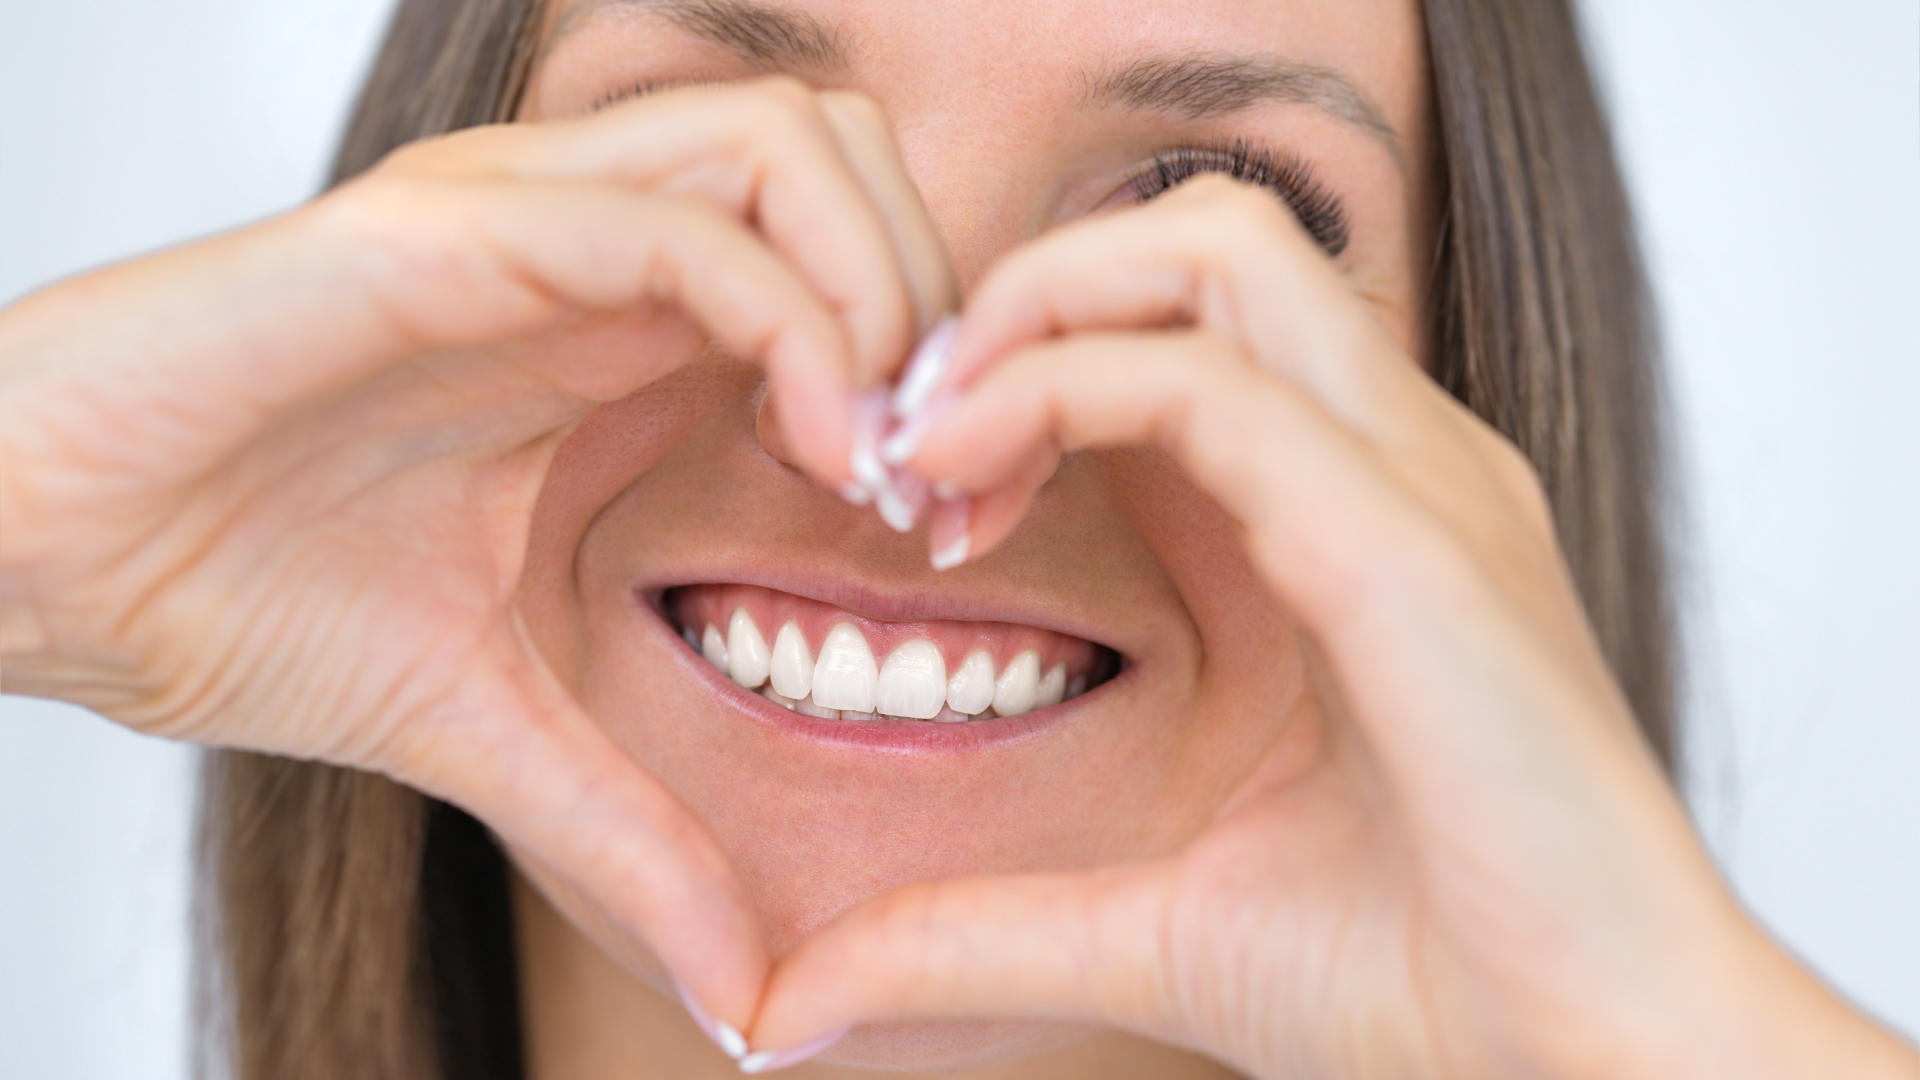 A woman is smiling and making a heart shape with her hands.